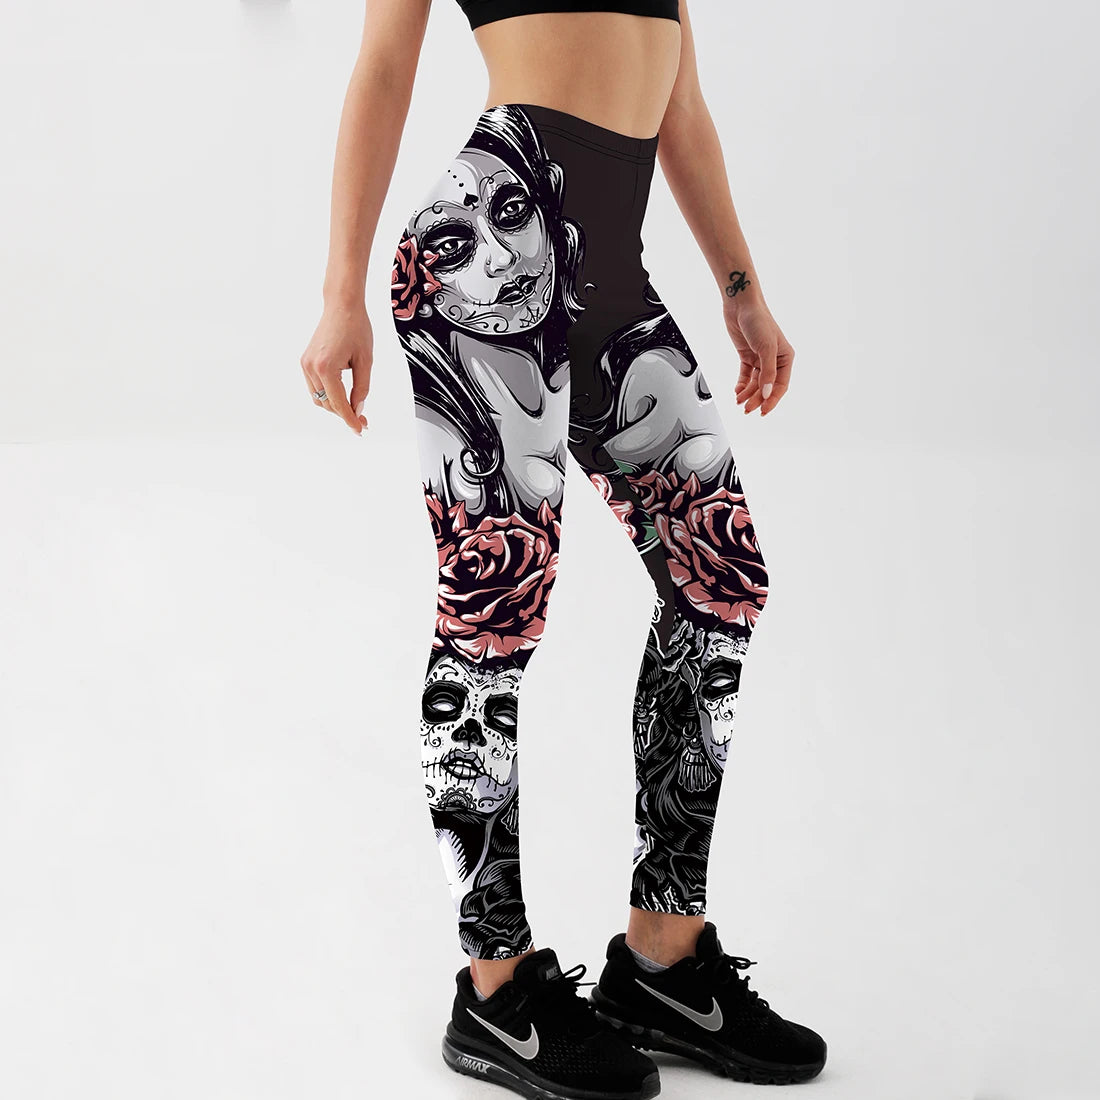 Qickitout New Arrival Sexy Girl With Roses Printed Gothic Fitness Workout  Mid Waist Pants women legging